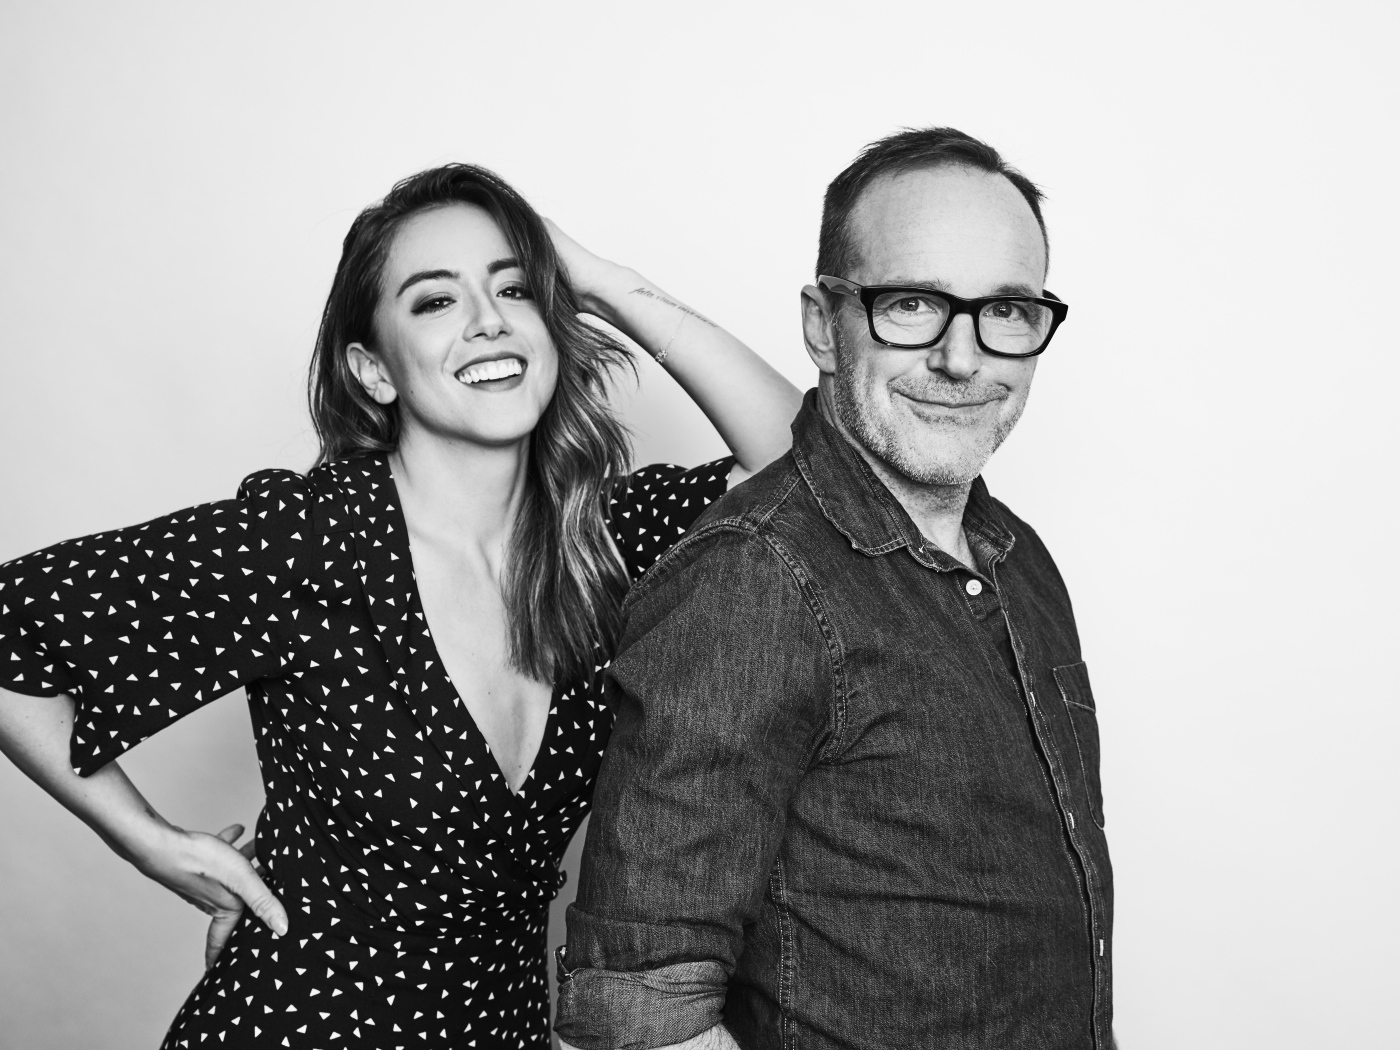 Actress Chloe Bennet and actor Clark Gregg black and white photo